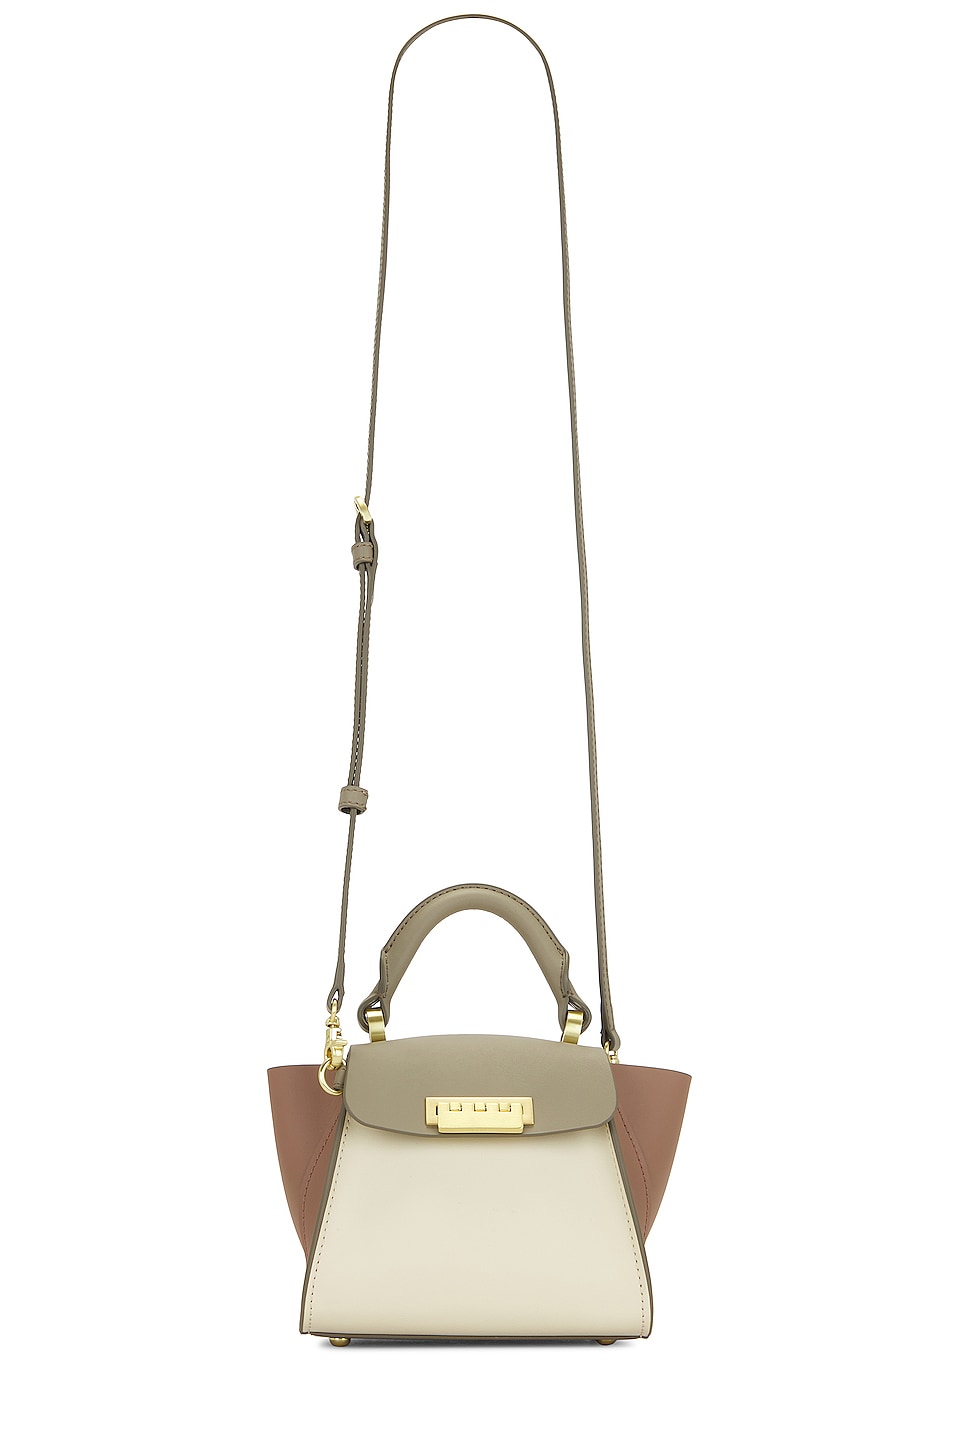 Zac Posen Earthette Small Double Compartment Leather Shoulder Bag